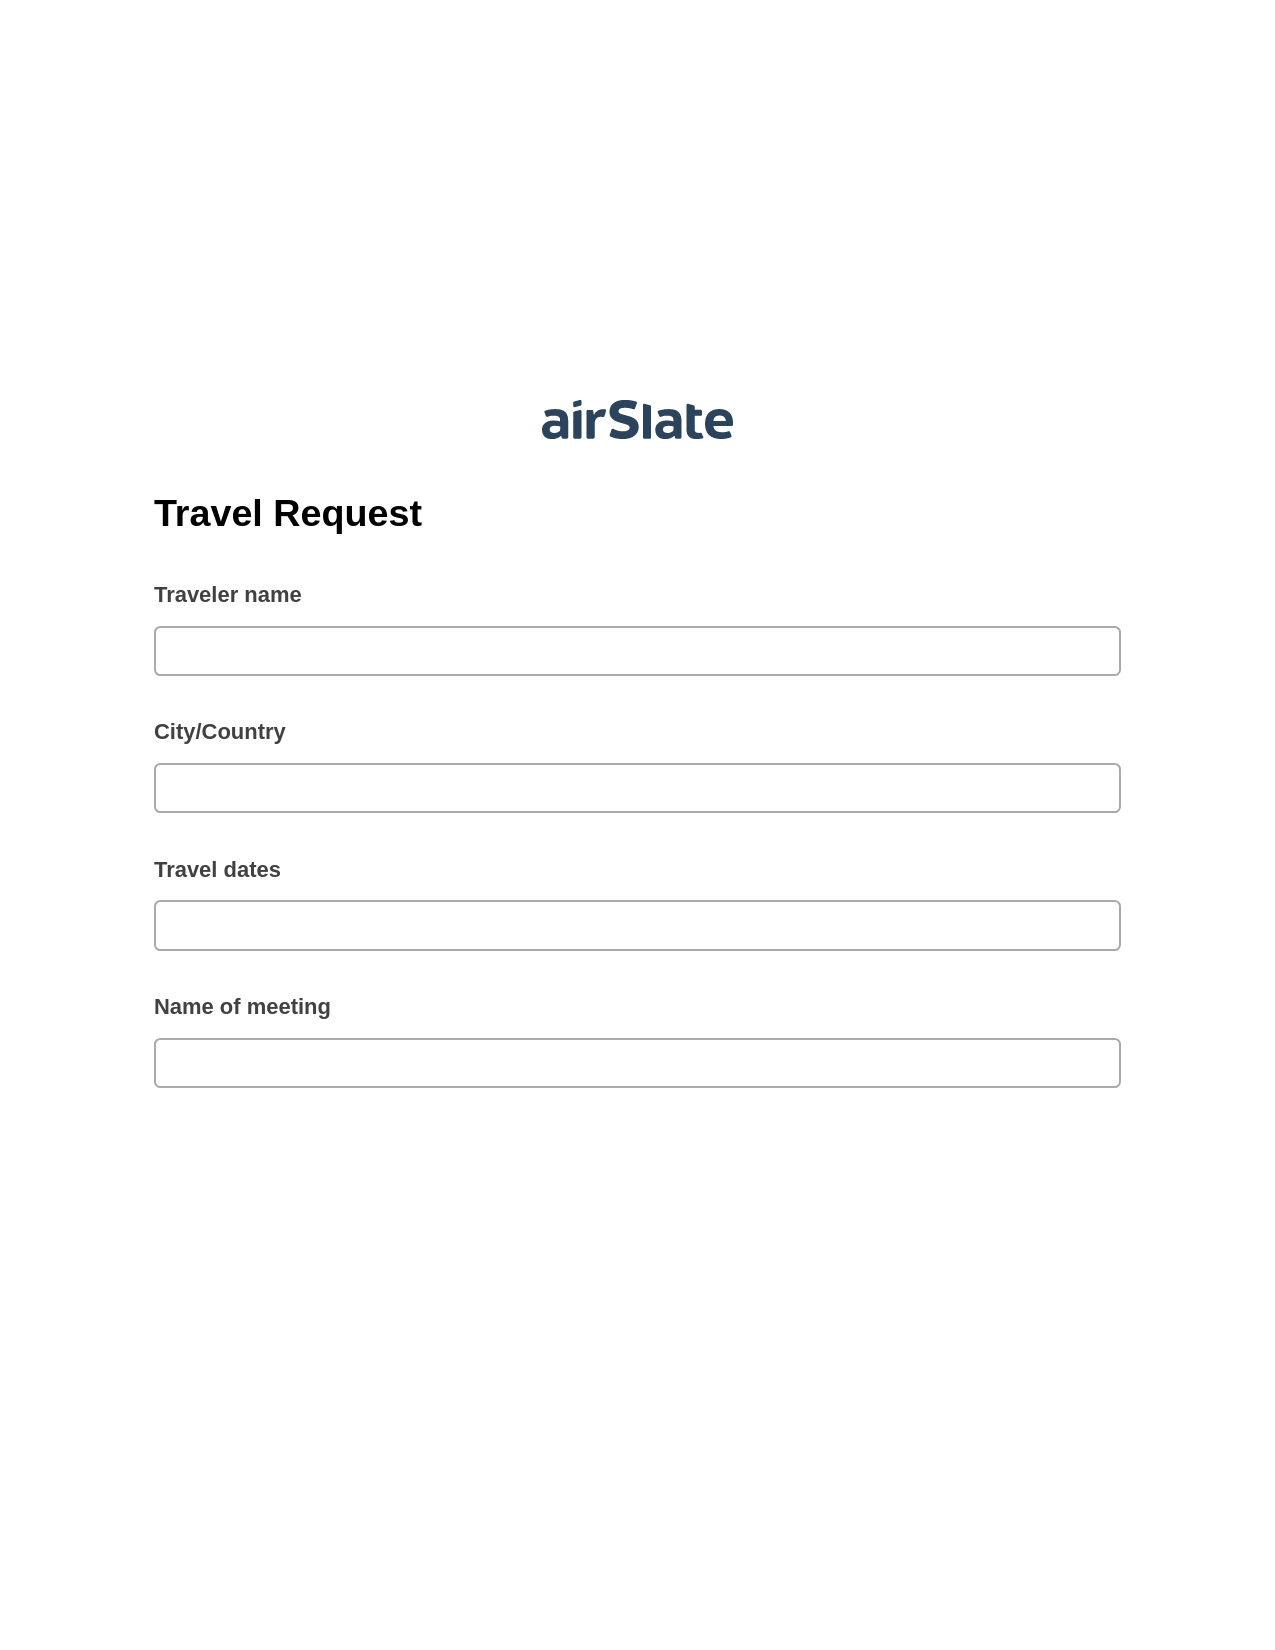 Travel Request Pre-fill from Excel Spreadsheet Bot, Create slate addon, Box Bot